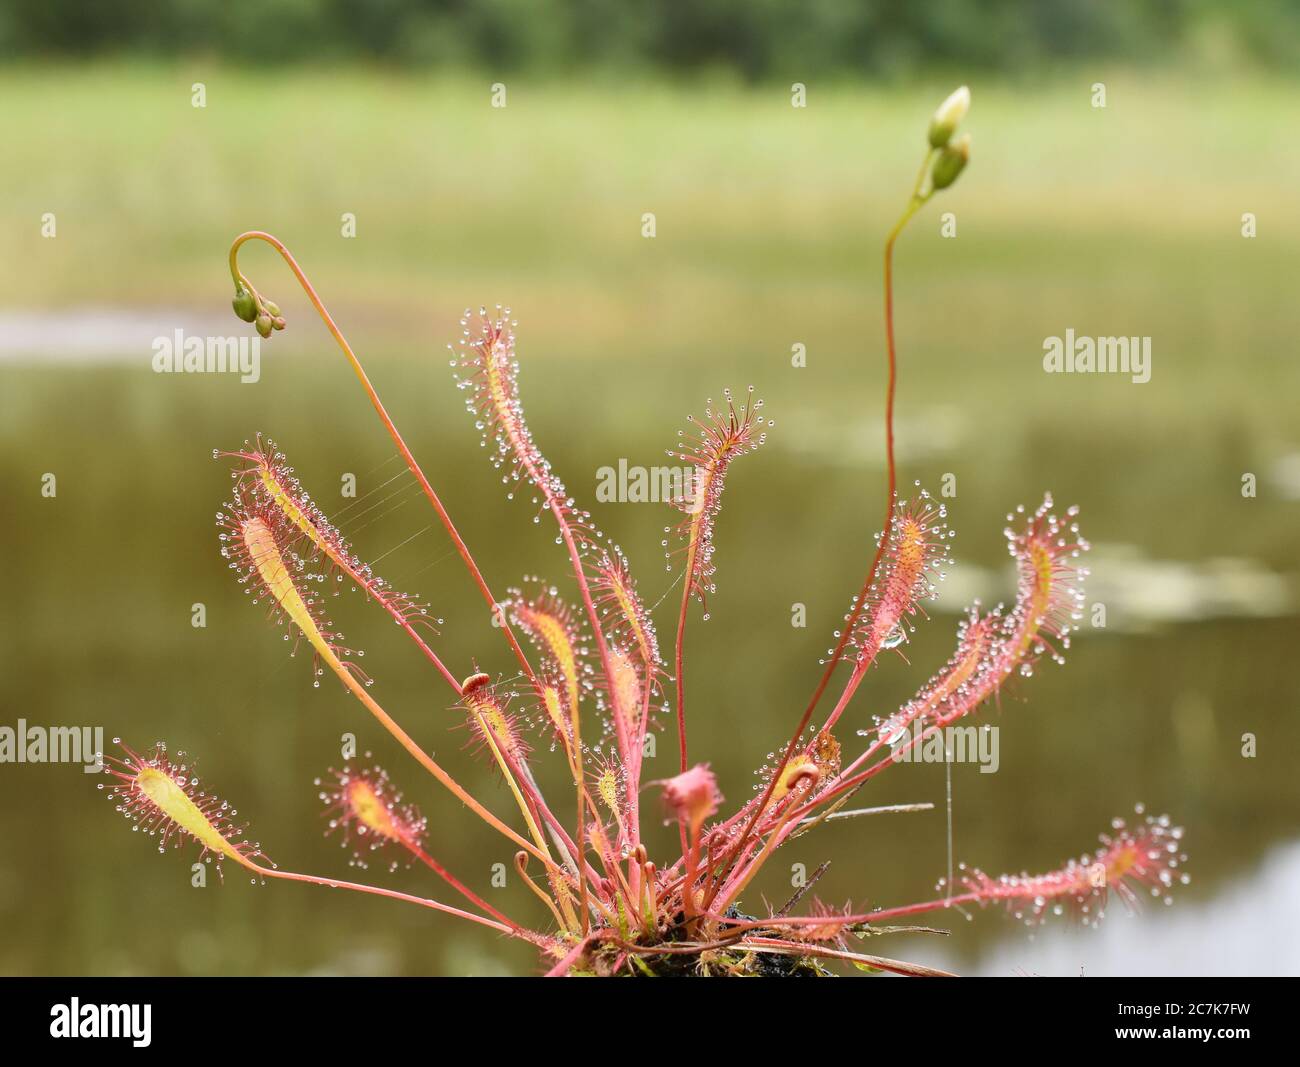 The sticky leaves of a Drosera anglica great sundew plant Stock Photo